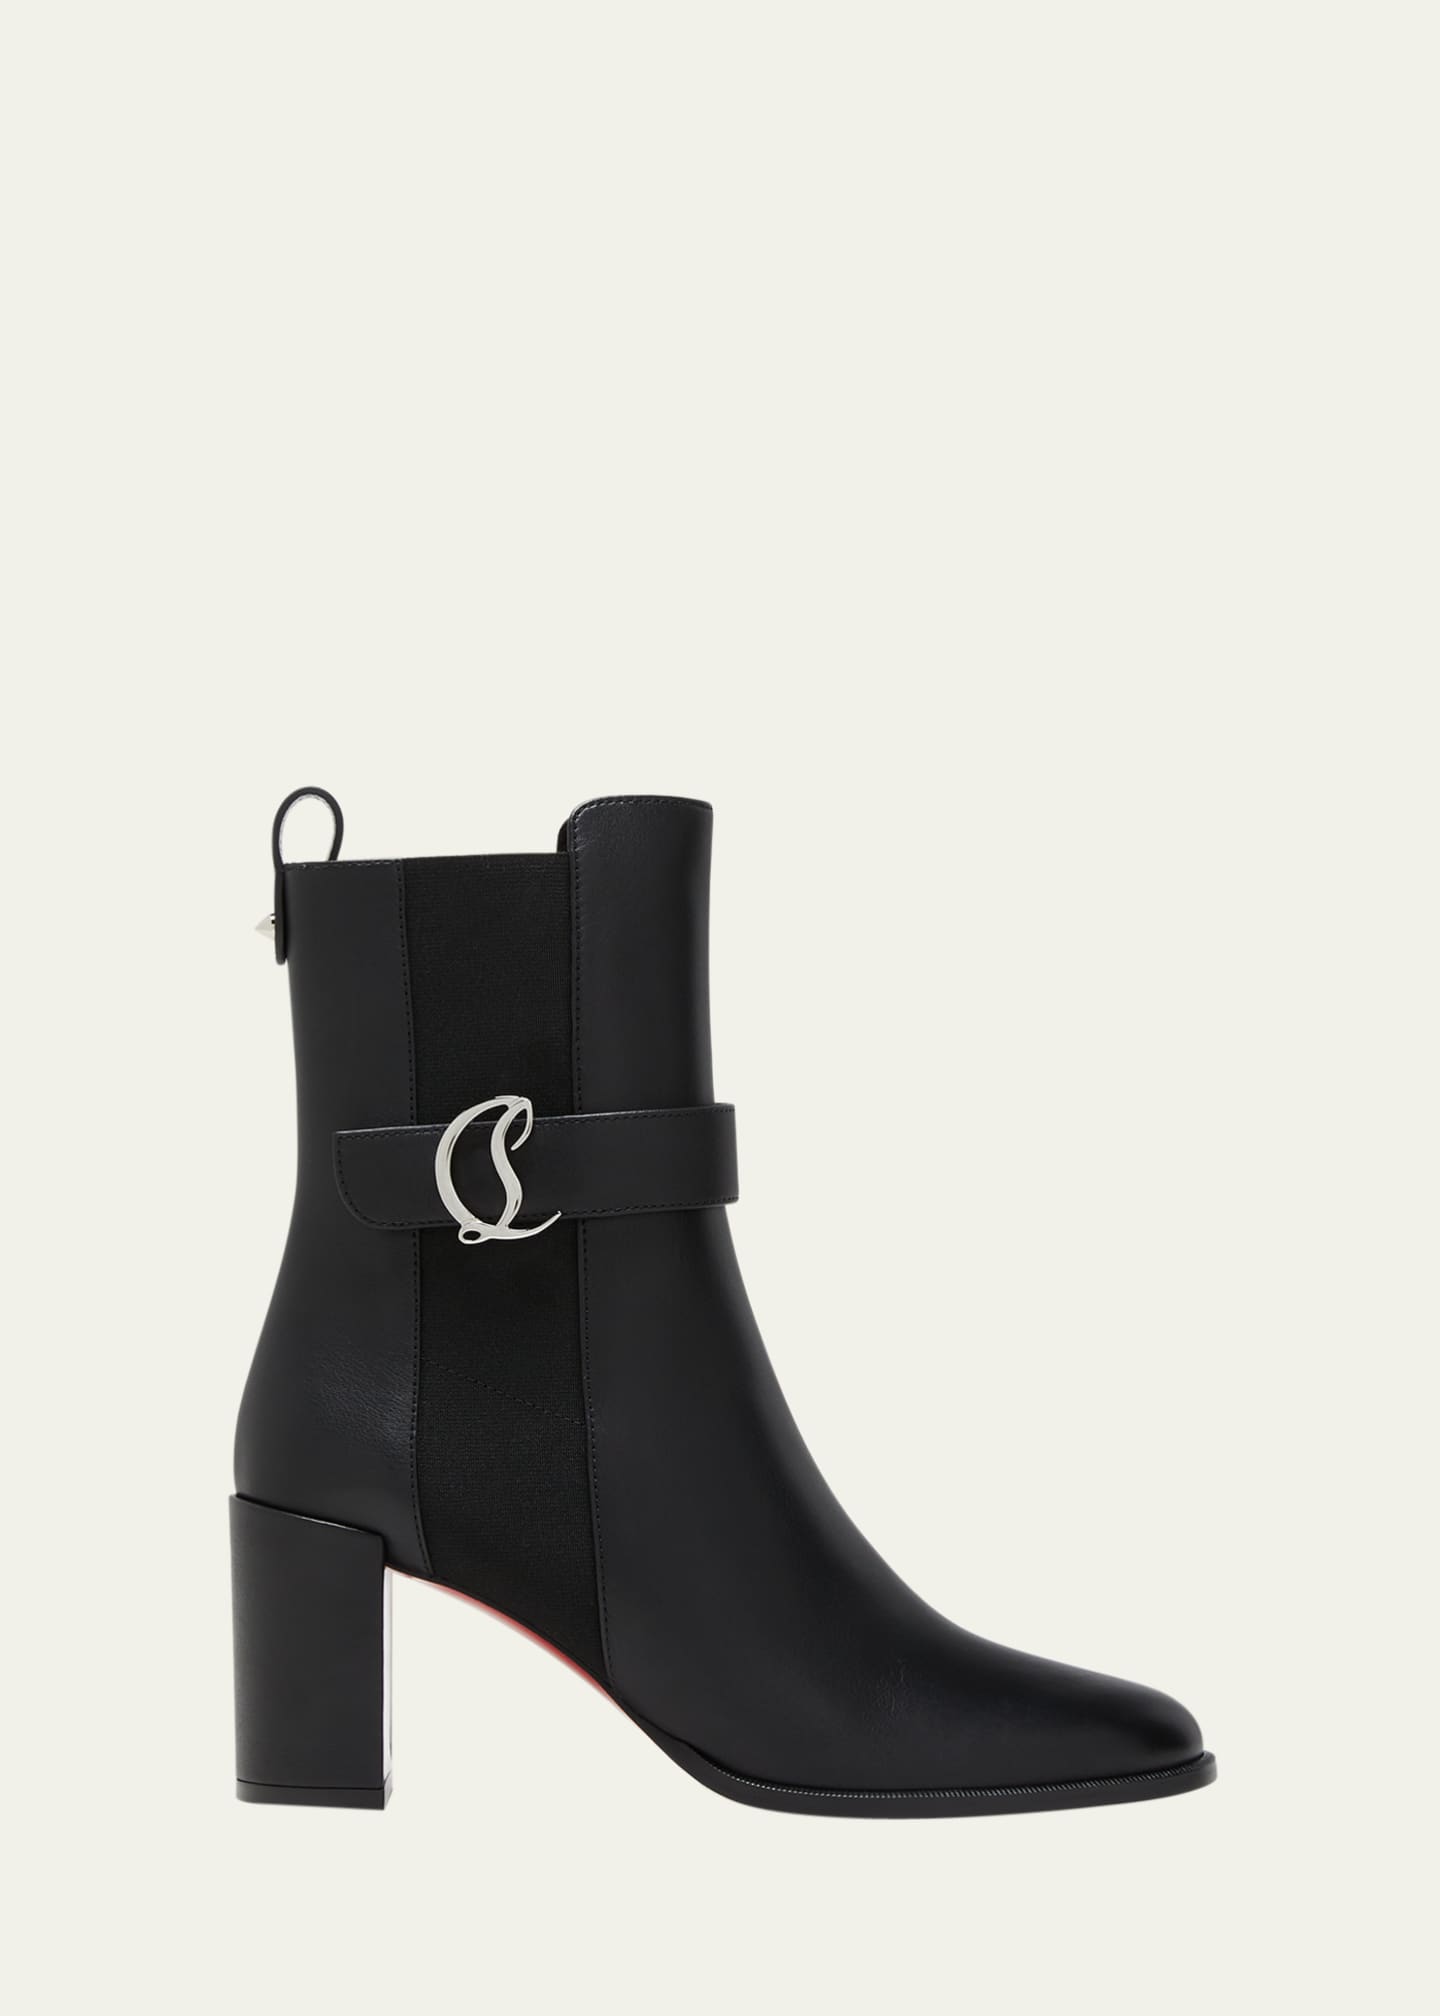 Christian Louboutin Leather Buckle Red Sole Booties - Bergdorf Goodman